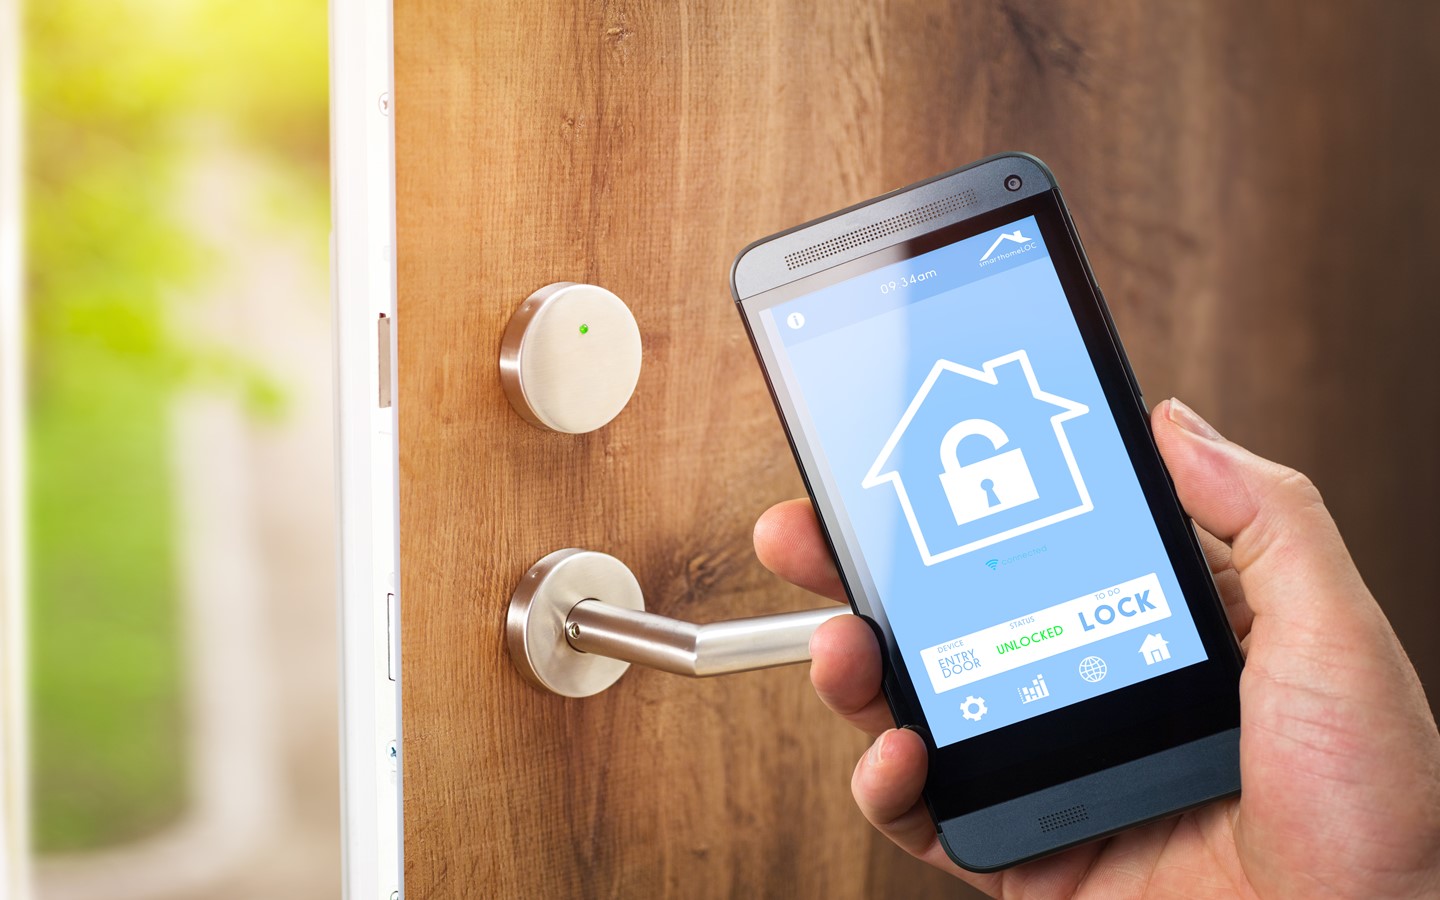 Intelligent locks are one of the newer home security gadgets